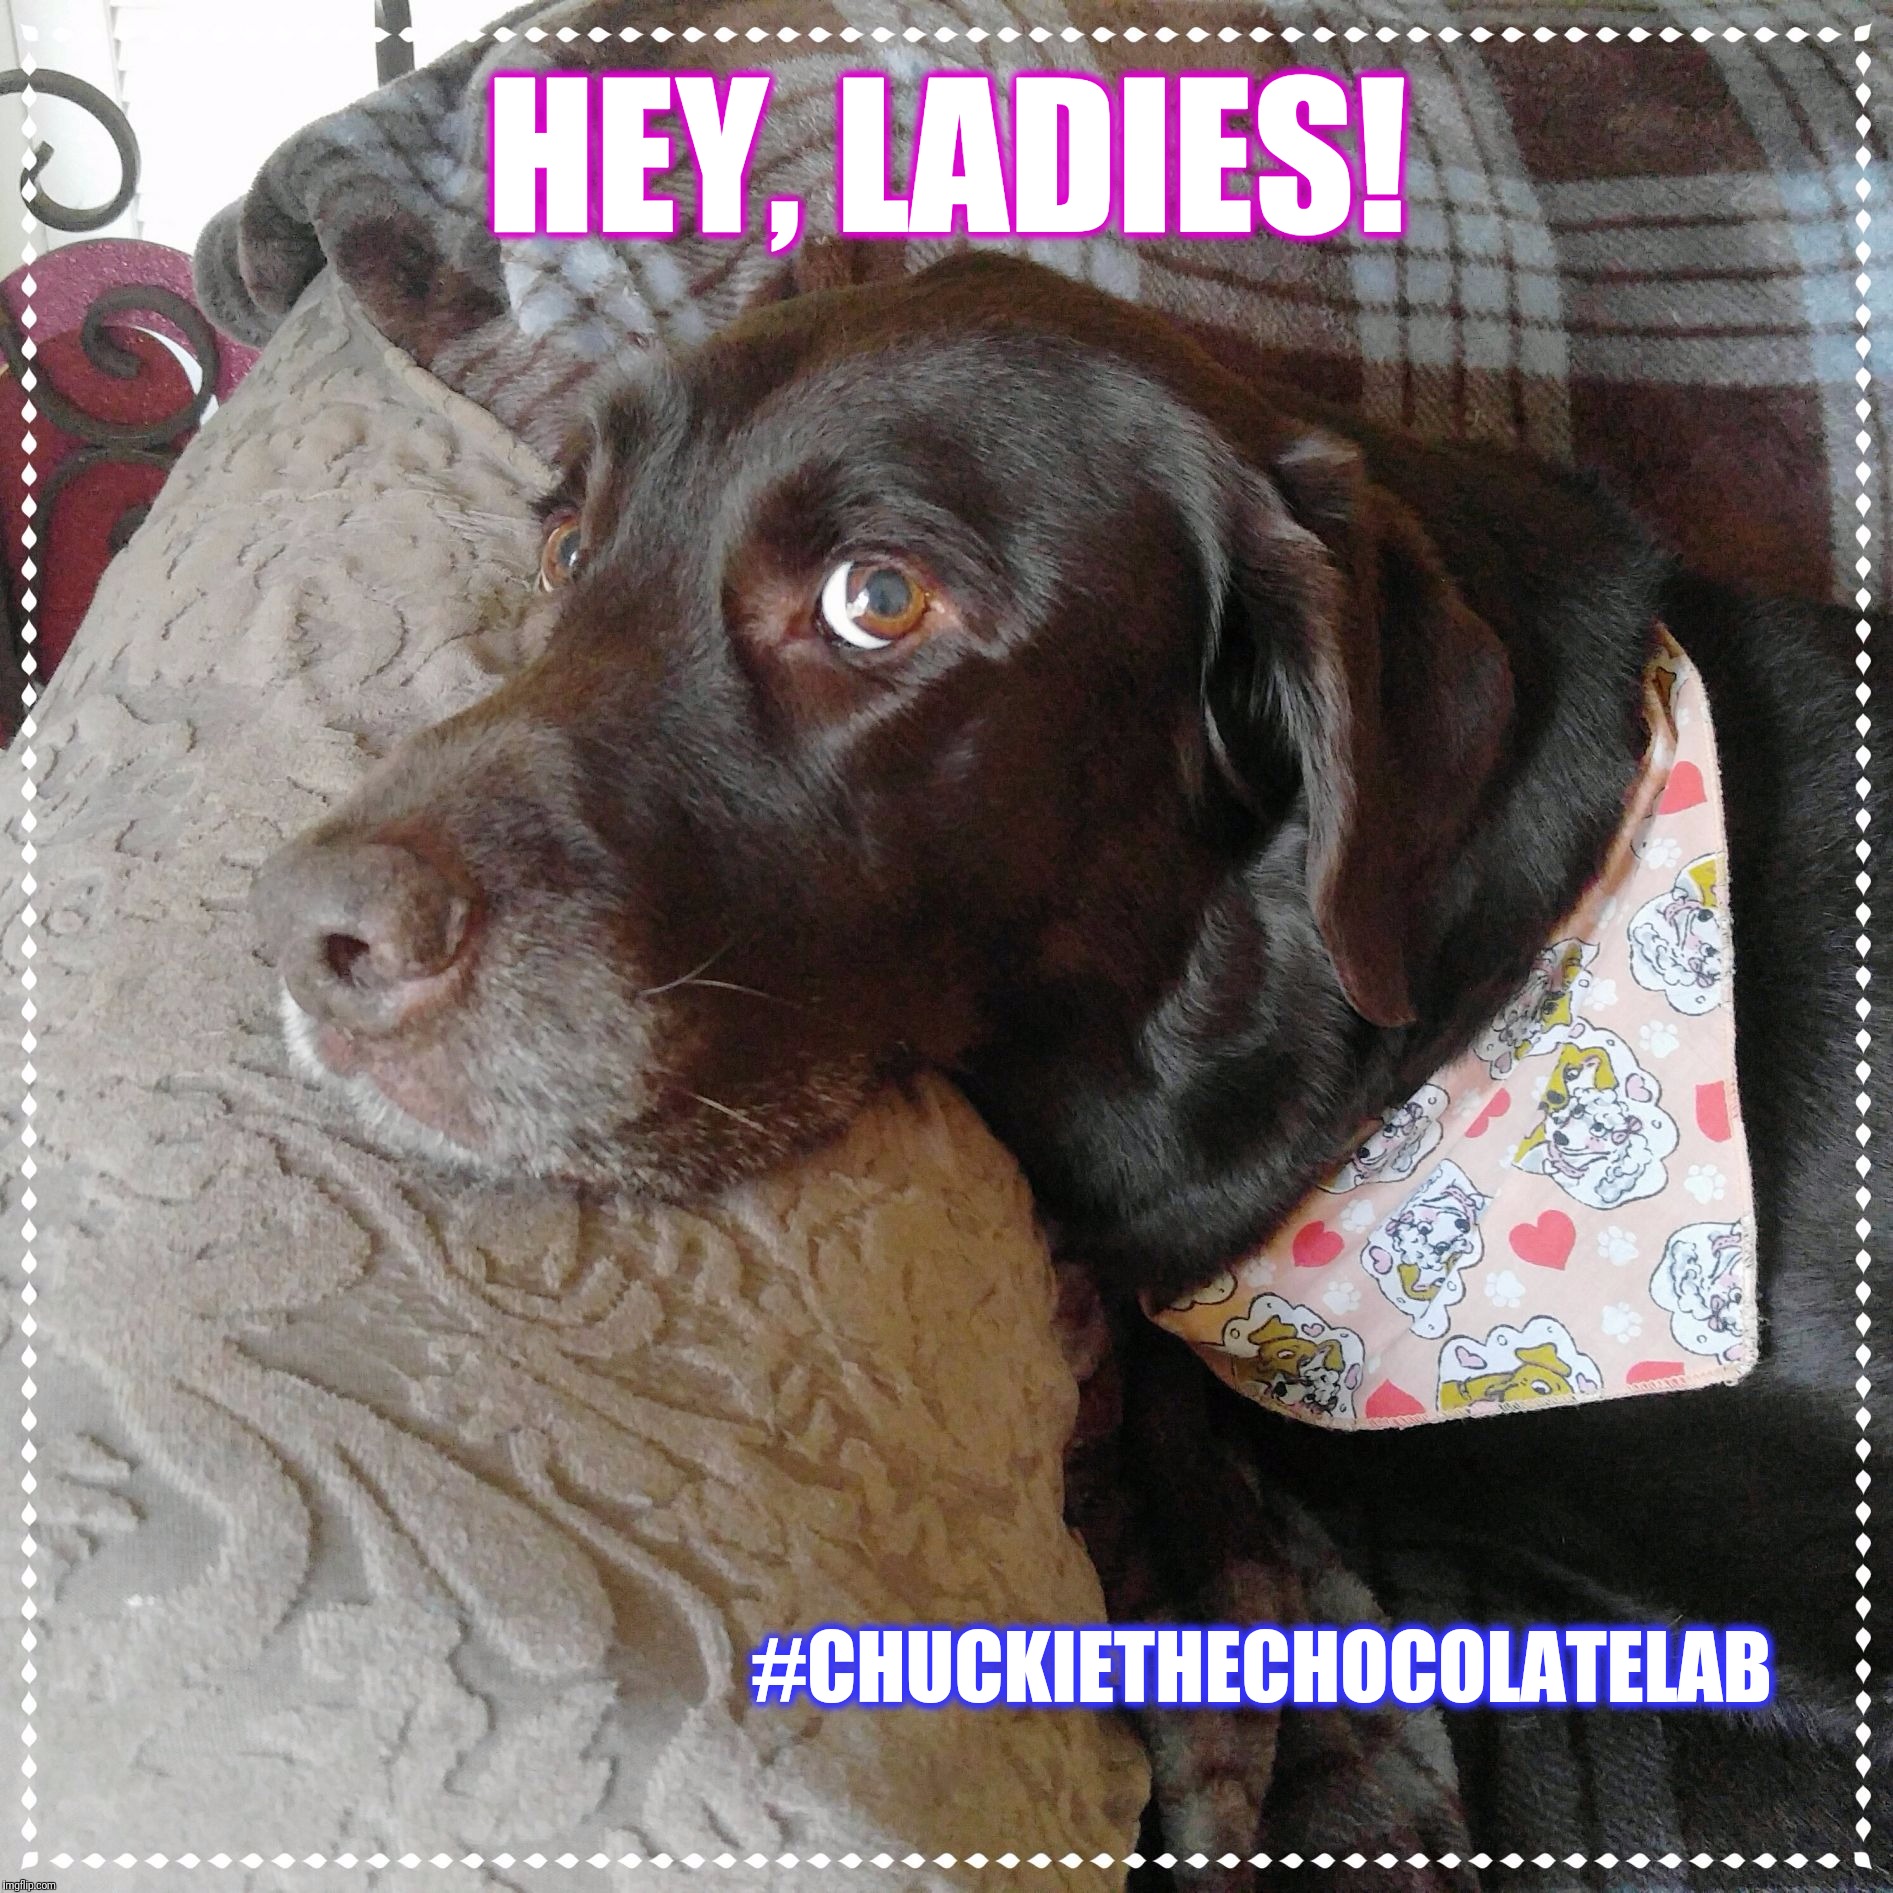 Hey Ladies!  |  HEY, LADIES! #CHUCKIETHECHOCOLATELAB | image tagged in chuckie the chocolate lab,hey ladies,funny,memes,valentine's day,dogs | made w/ Imgflip meme maker